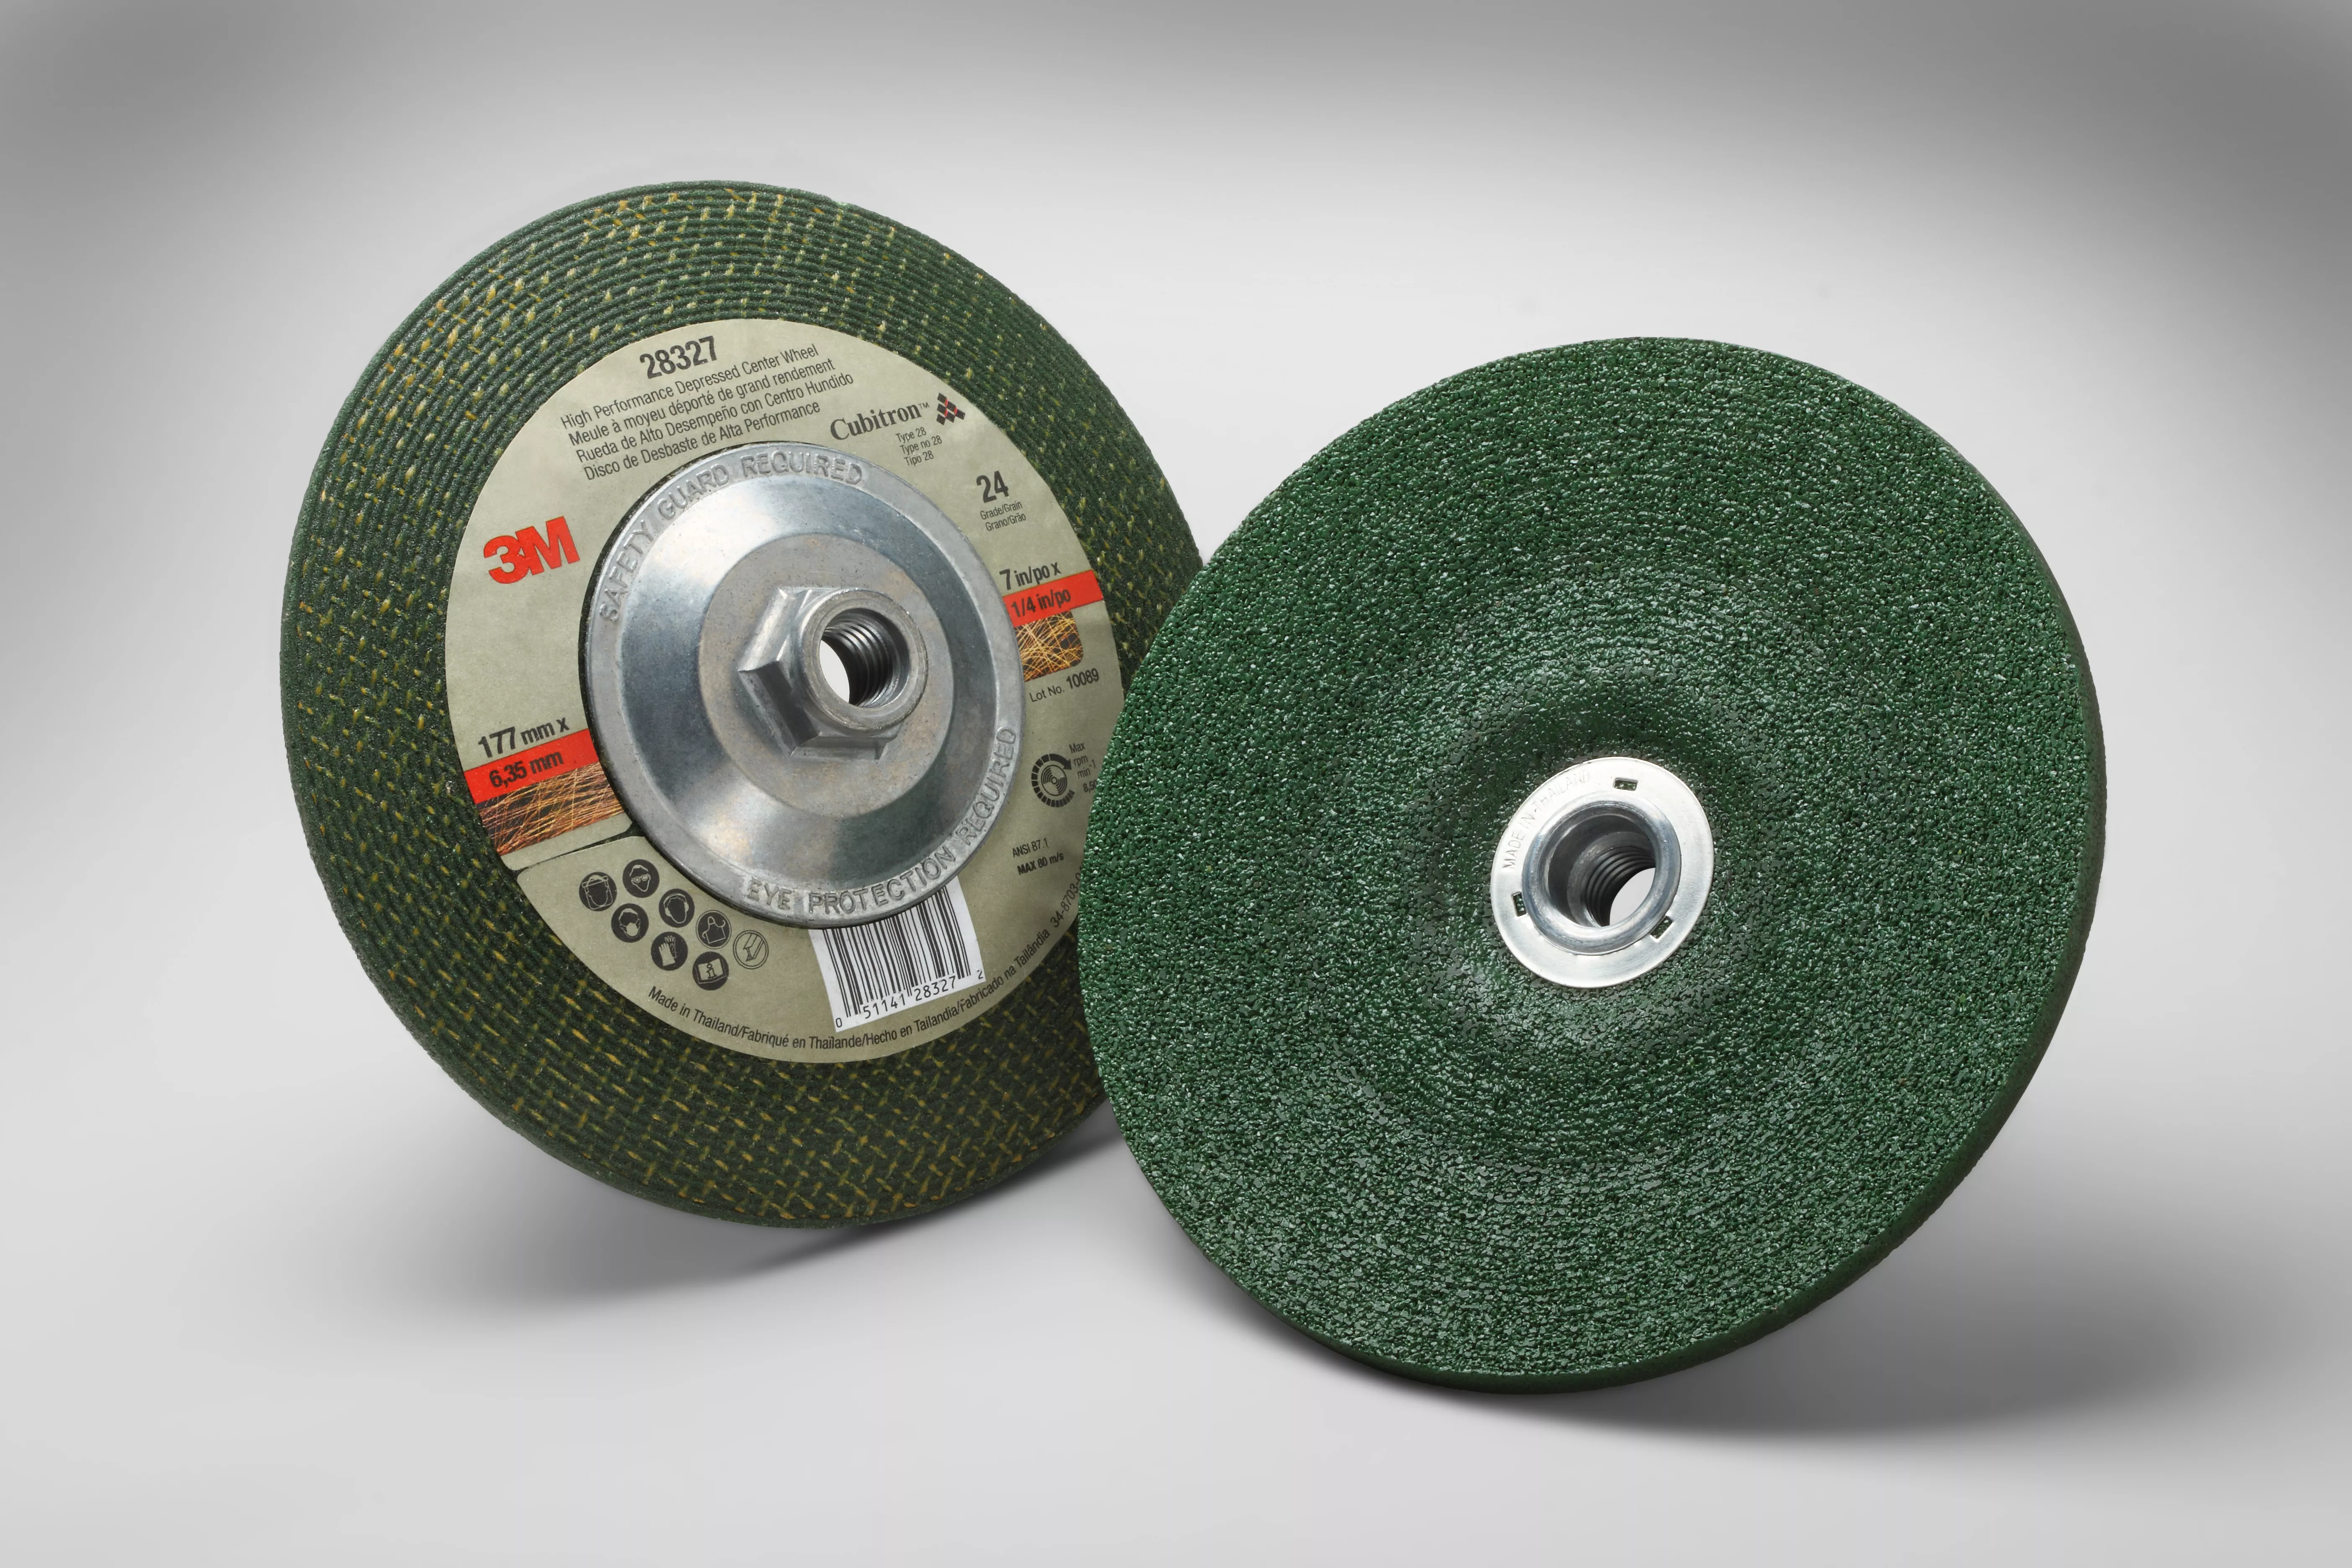 3M™ Green Corps™ Depressed Center Grinding Wheel, T27, 36, 7 in x 1/4 in
x 5/8 in-11 Internal, 10/Carton, 20 ea/Case